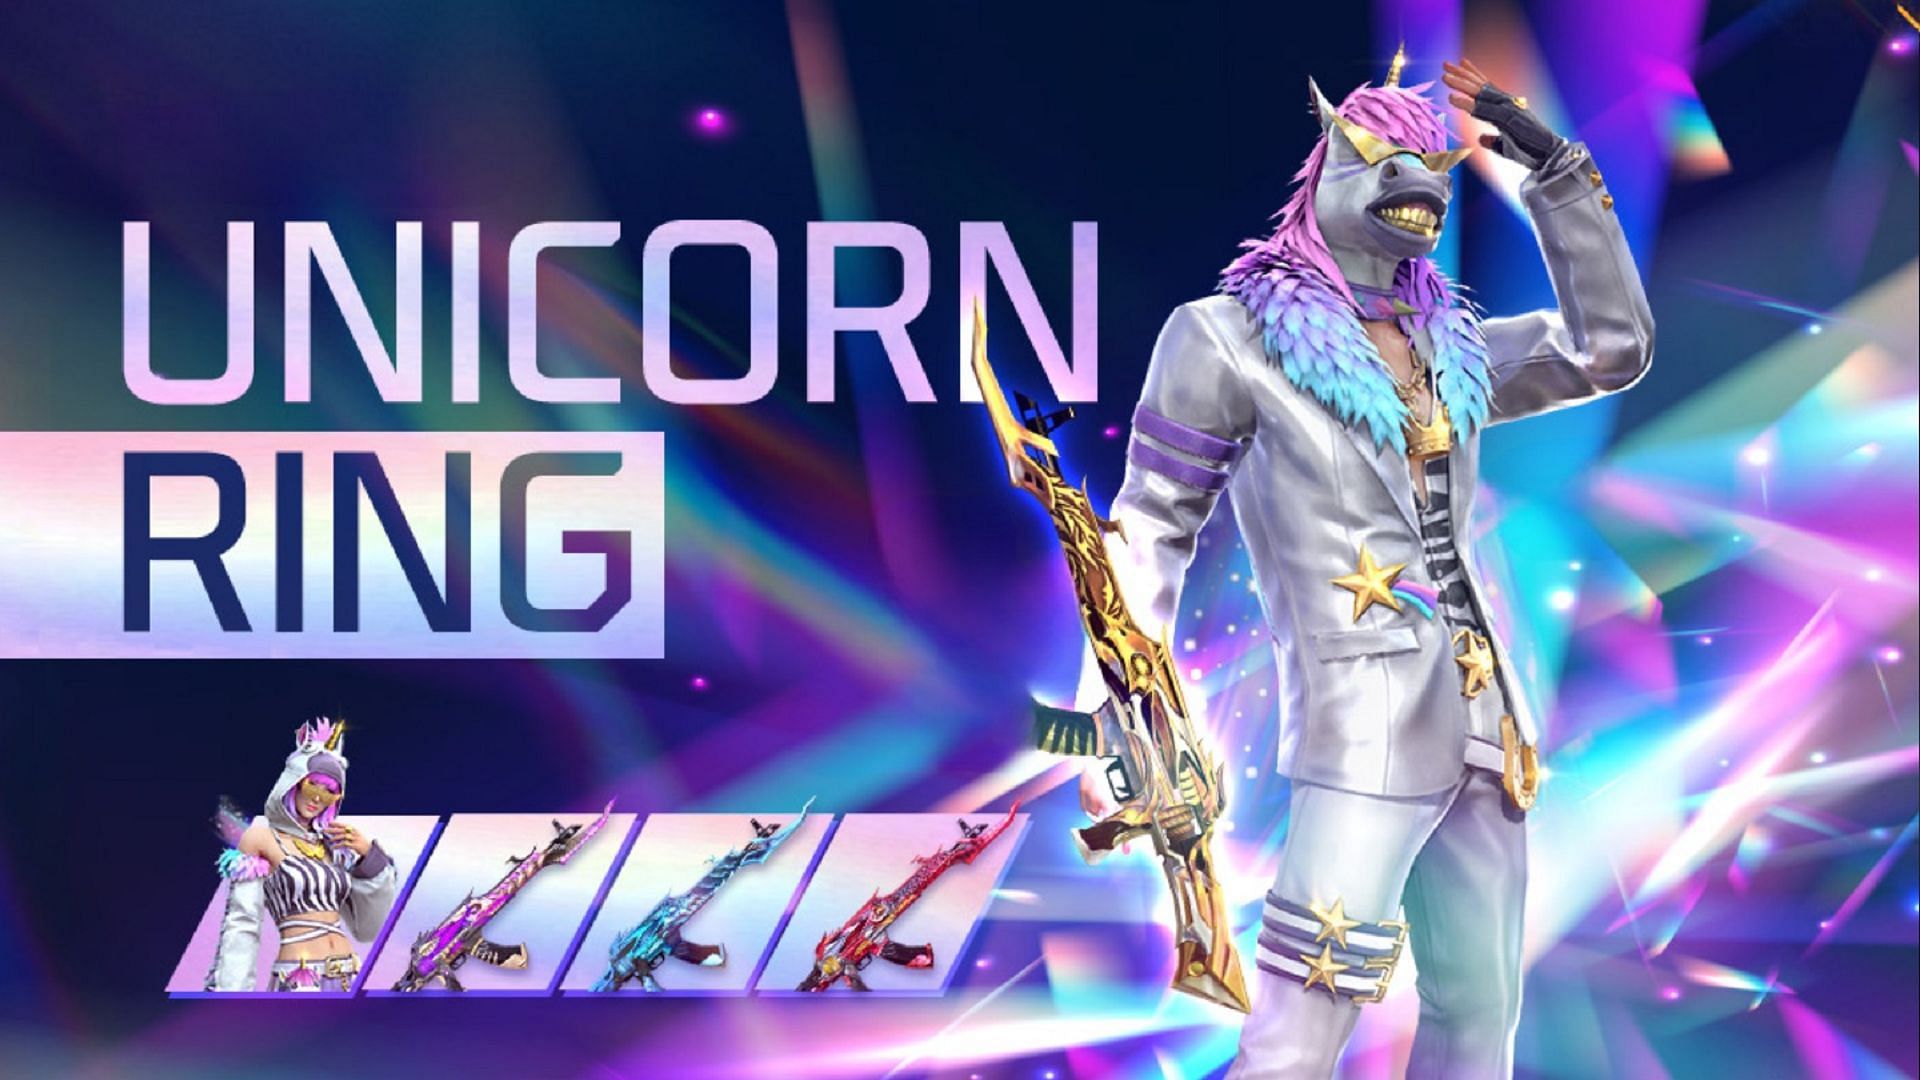 Unicorn Ring Luck Royale has been added to Free Fire (Image via Garena)